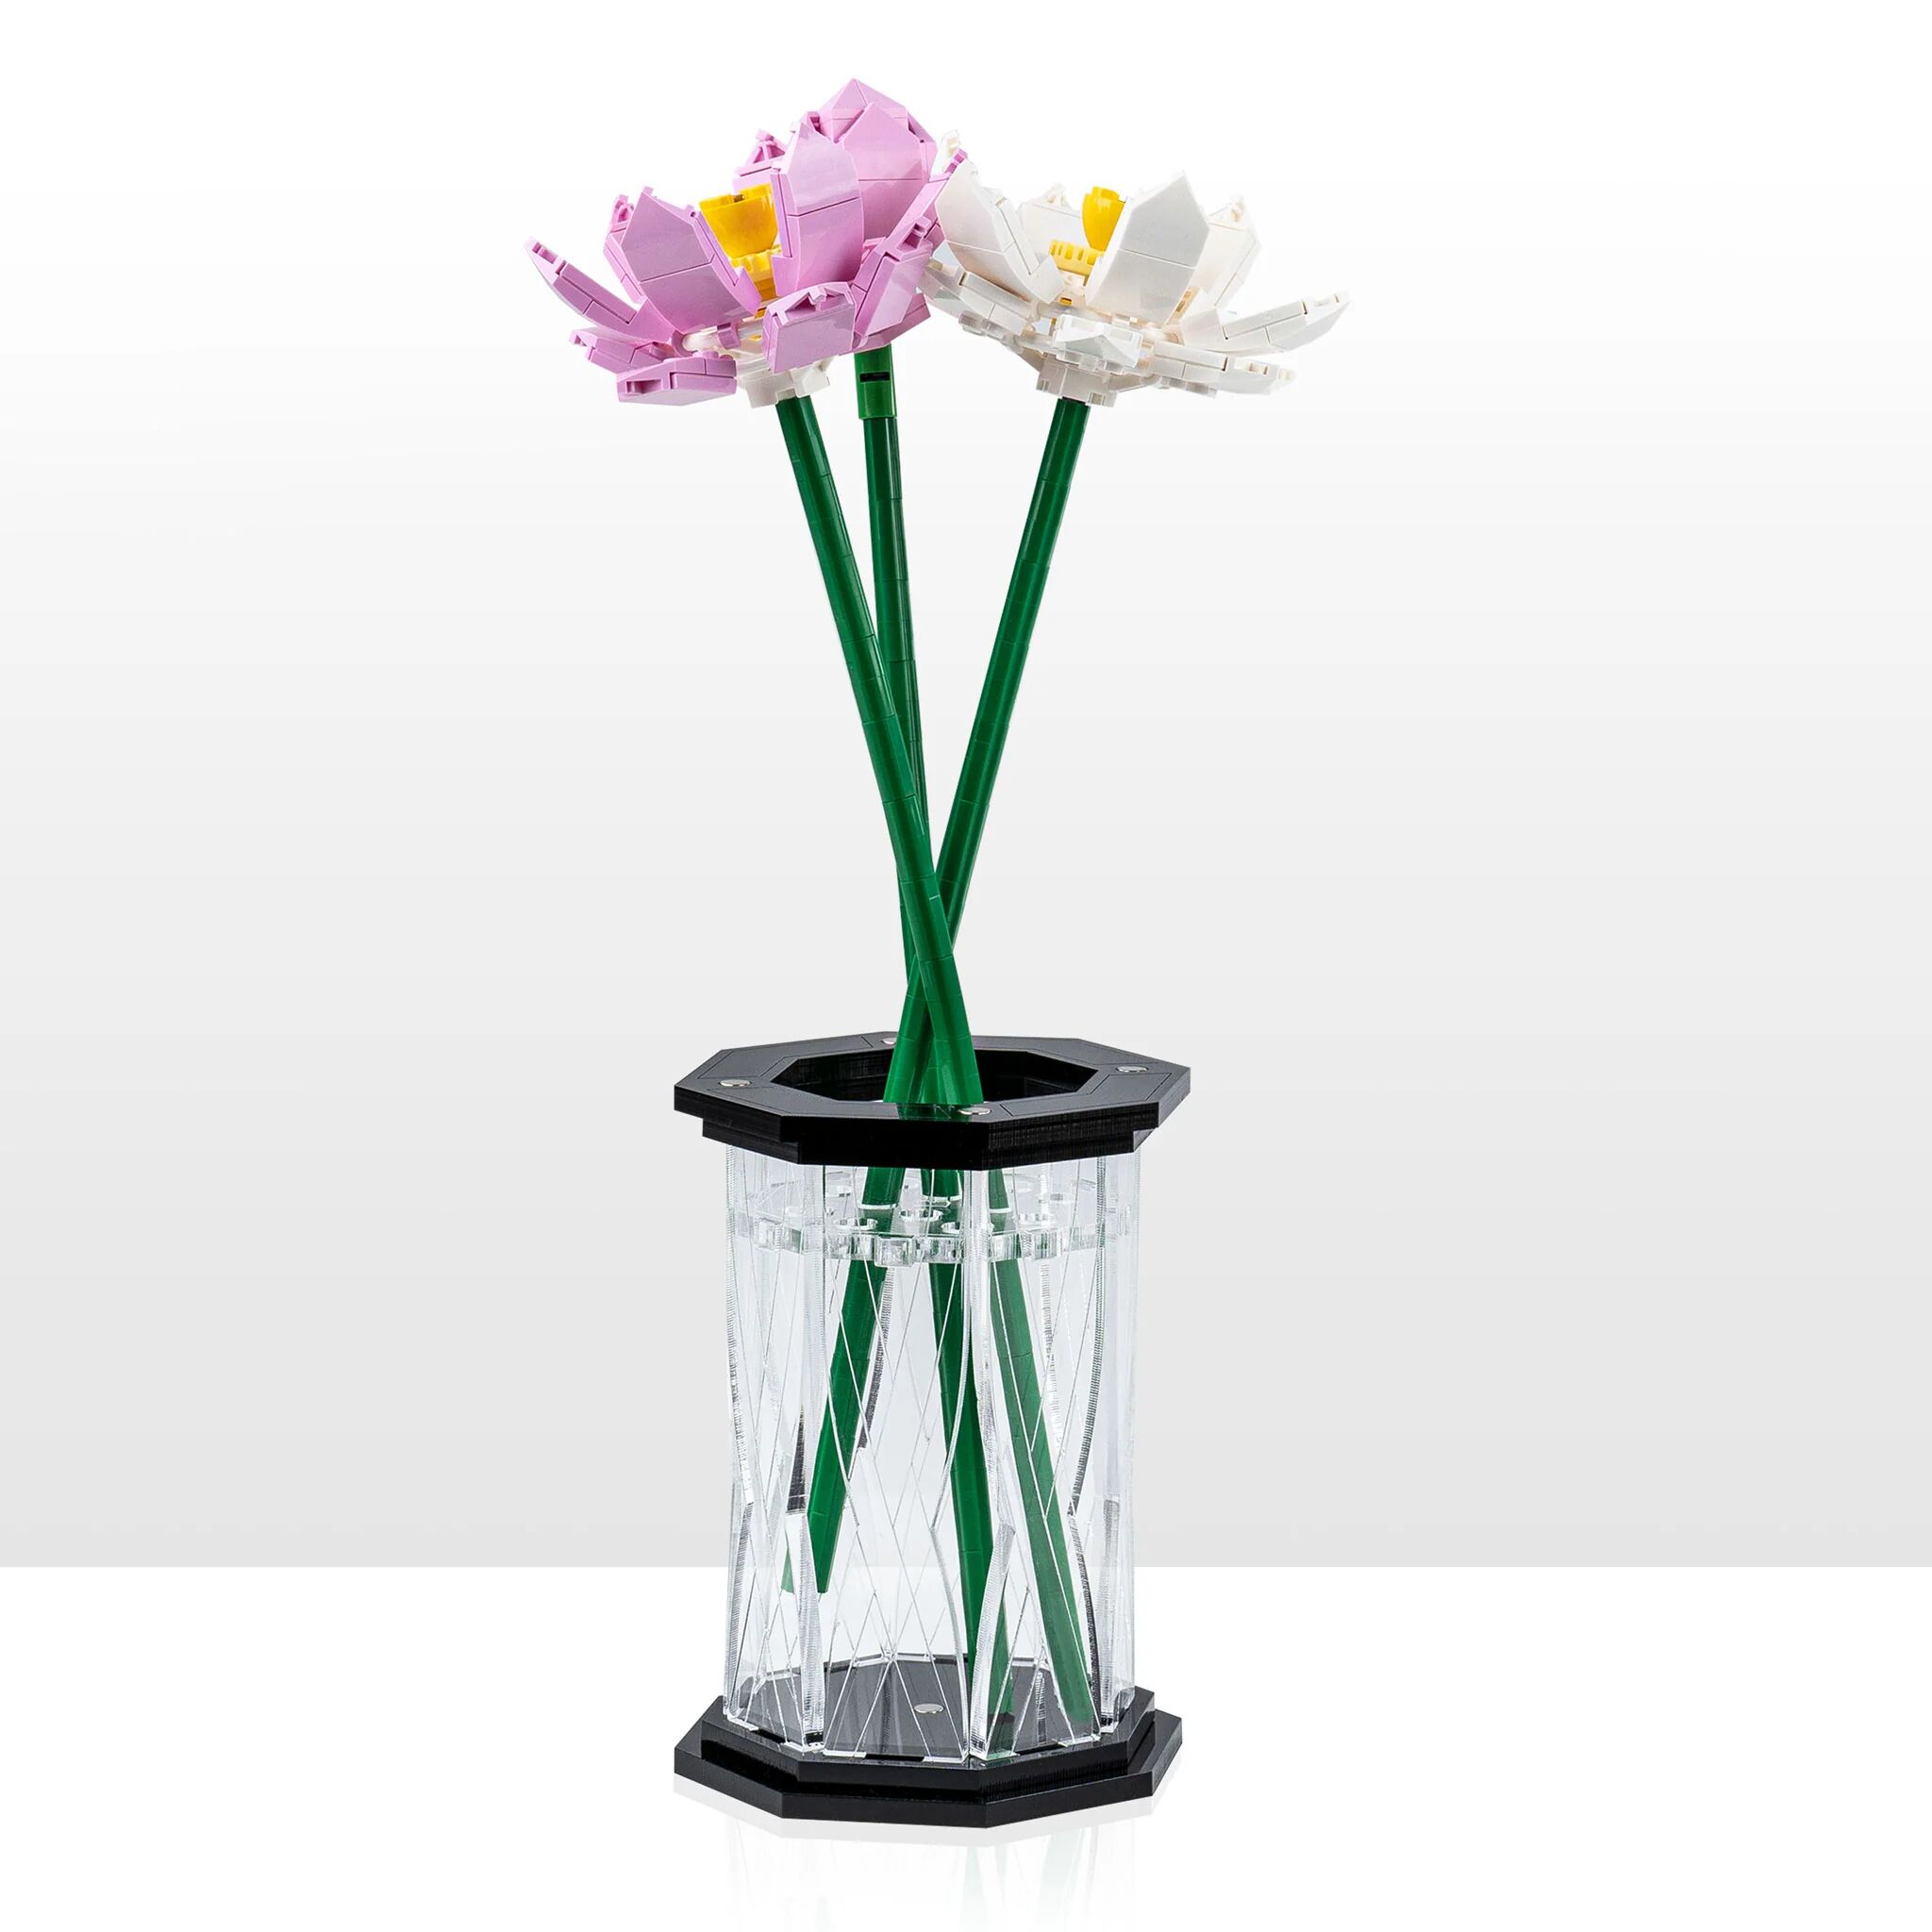 Wicked Brick Large Display Vase for LEGO® Flowers - Black - 6 - Cross Etched design